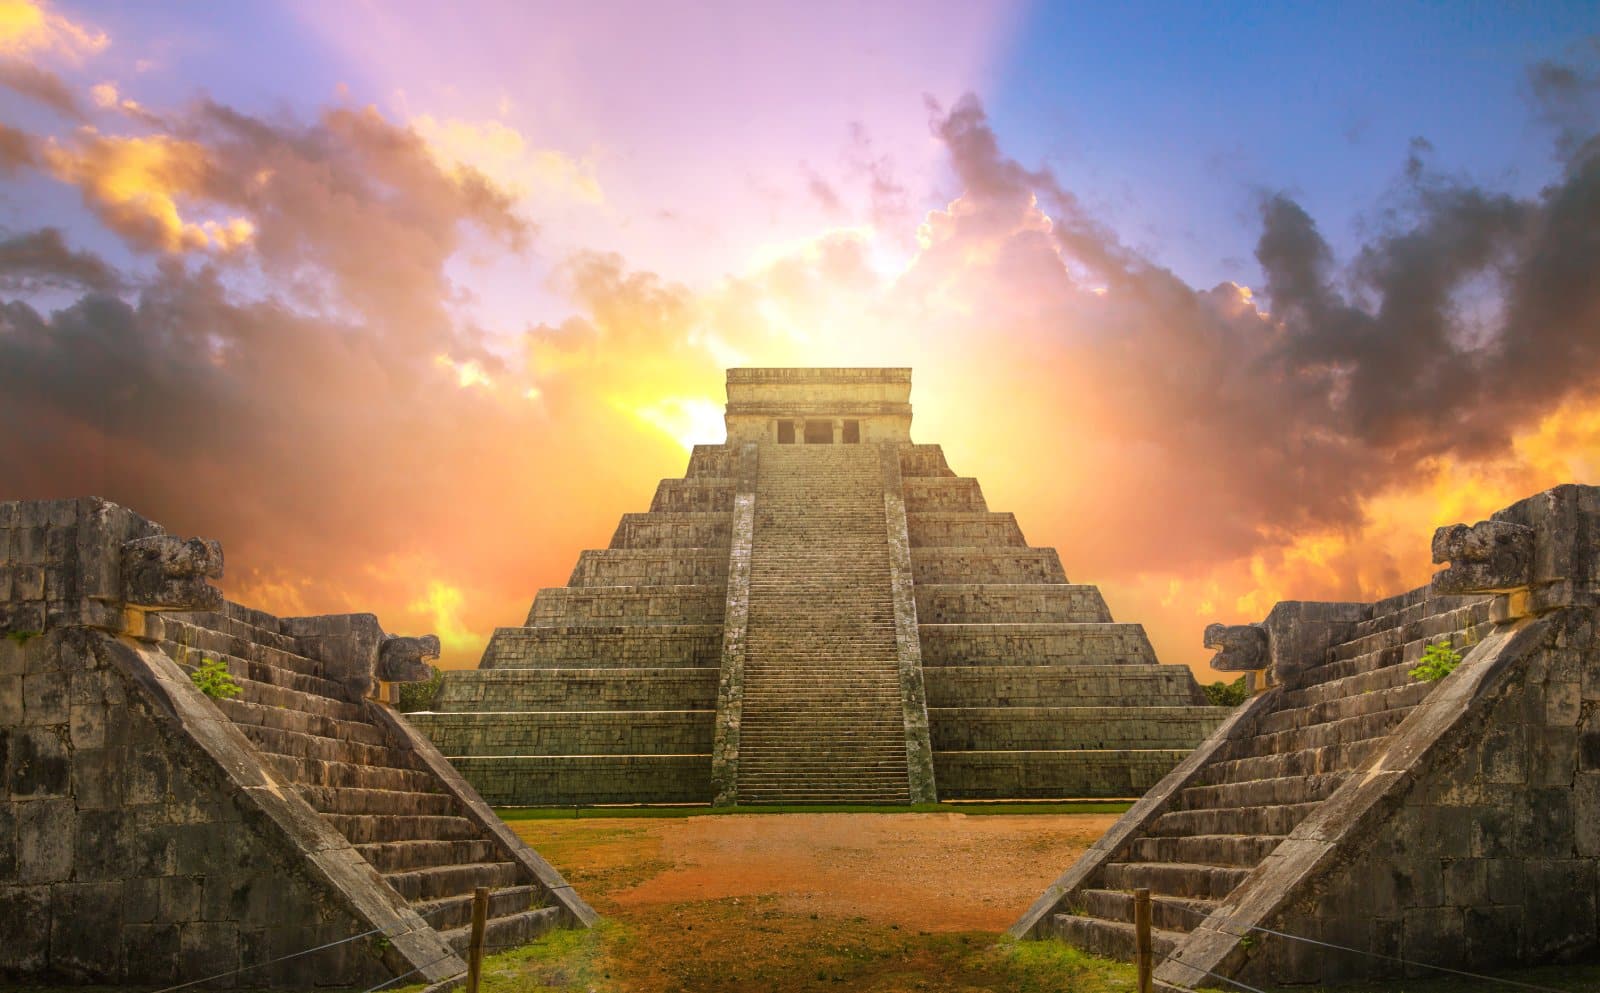 <p class="wp-caption-text">Image Credit: Shutterstock / IR Stone</p>  <p><span>Mexico’s rich pre-Columbian heritage, colonial history, and diverse ecosystems are well-represented among its UNESCO World Heritage Sites. From the ancient Maya city of Chichen Itza to the colonial architecture of Oaxaca and the vibrant ecosystems of the Sian Ka’an Biosphere Reserve, Mexico offers a journey through time and nature. These sites highlight the artistic and architectural achievements of Mexico’s ancient civilizations and the country’s ongoing efforts to preserve its natural landscapes and biodiversity.</span></p>